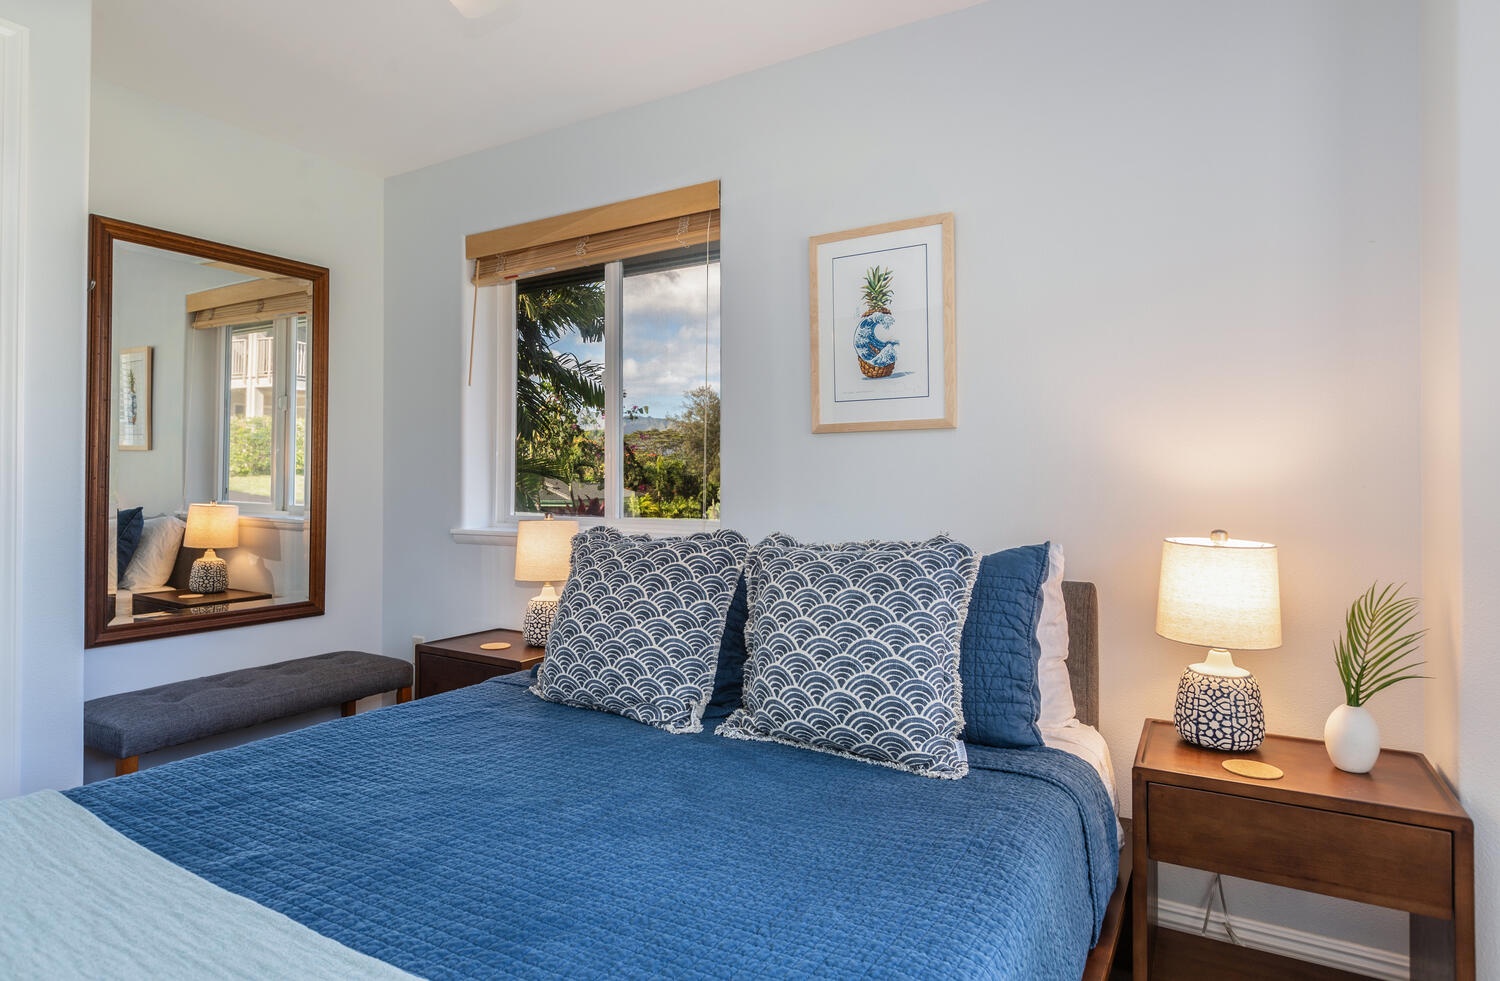 Princeville Vacation Rentals, Sea Glass - The third guest suite with a queen bed.